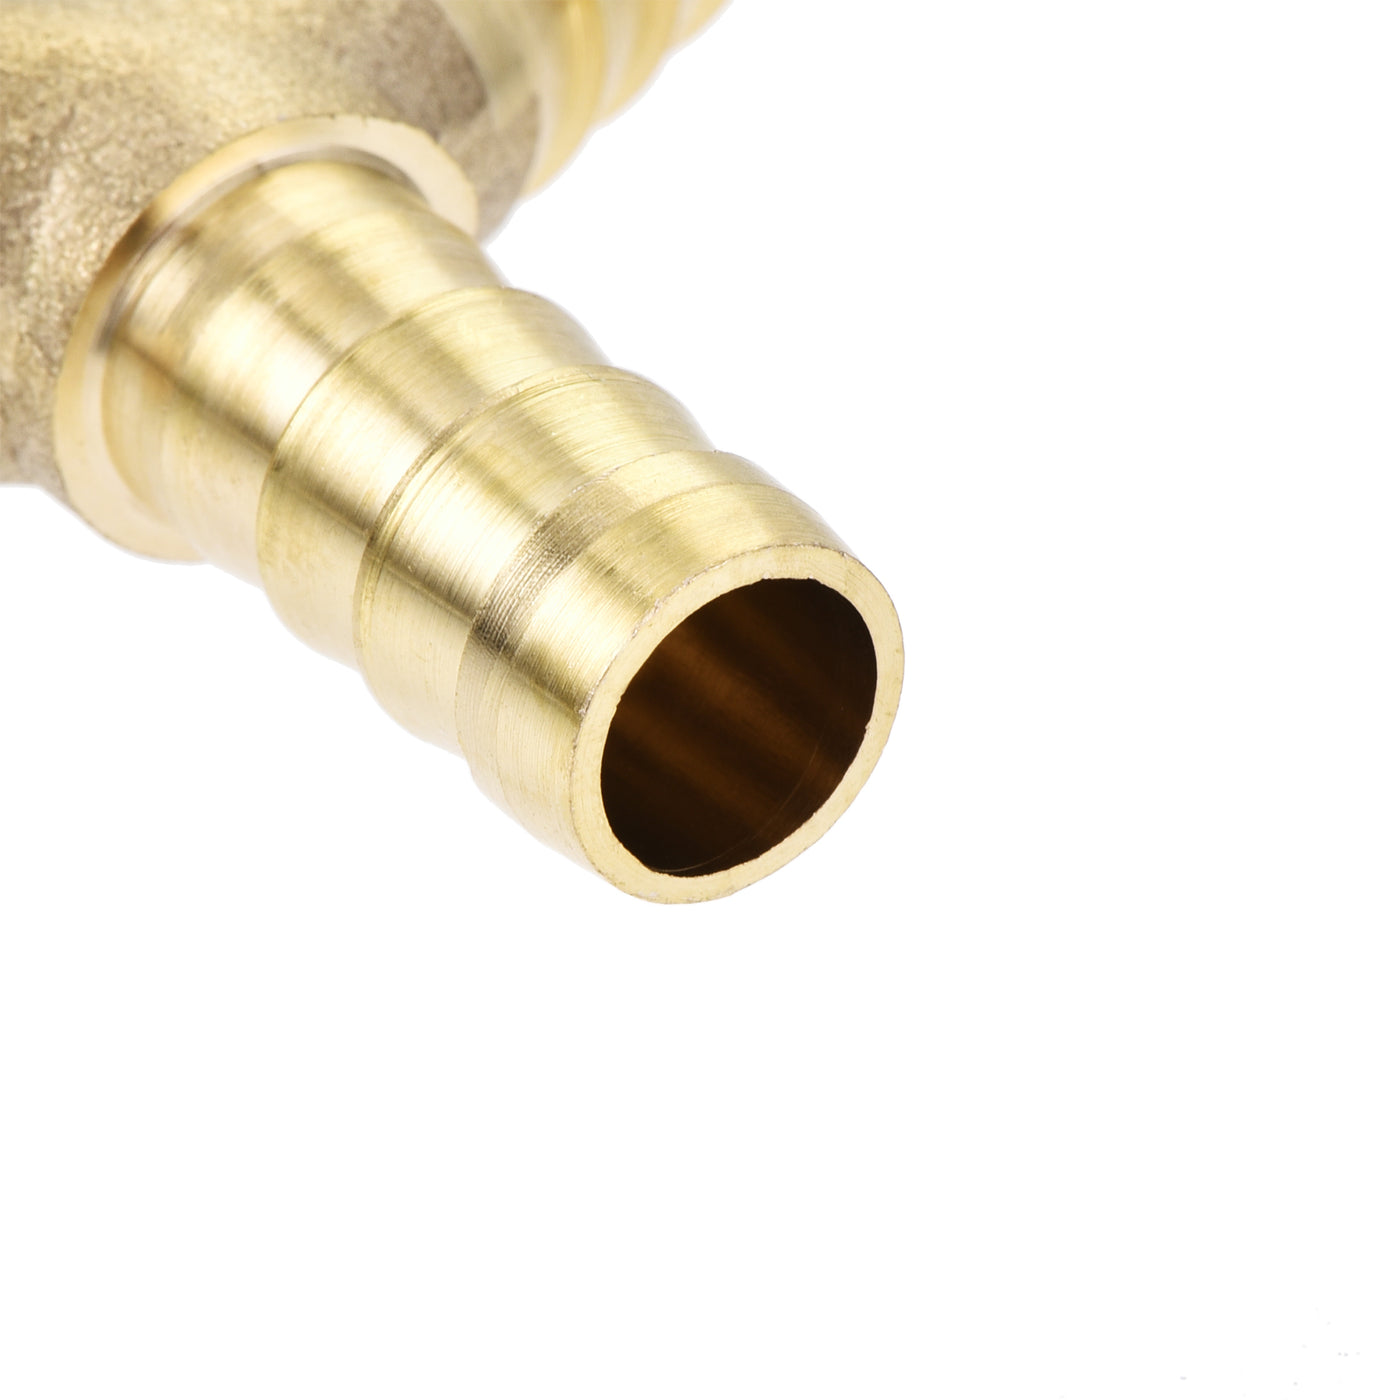 Uxcell Uxcell Reducing Barb Hose Fitting Y Shape Pipe Connector Brass 1/2" x 3/8" x 3/8"